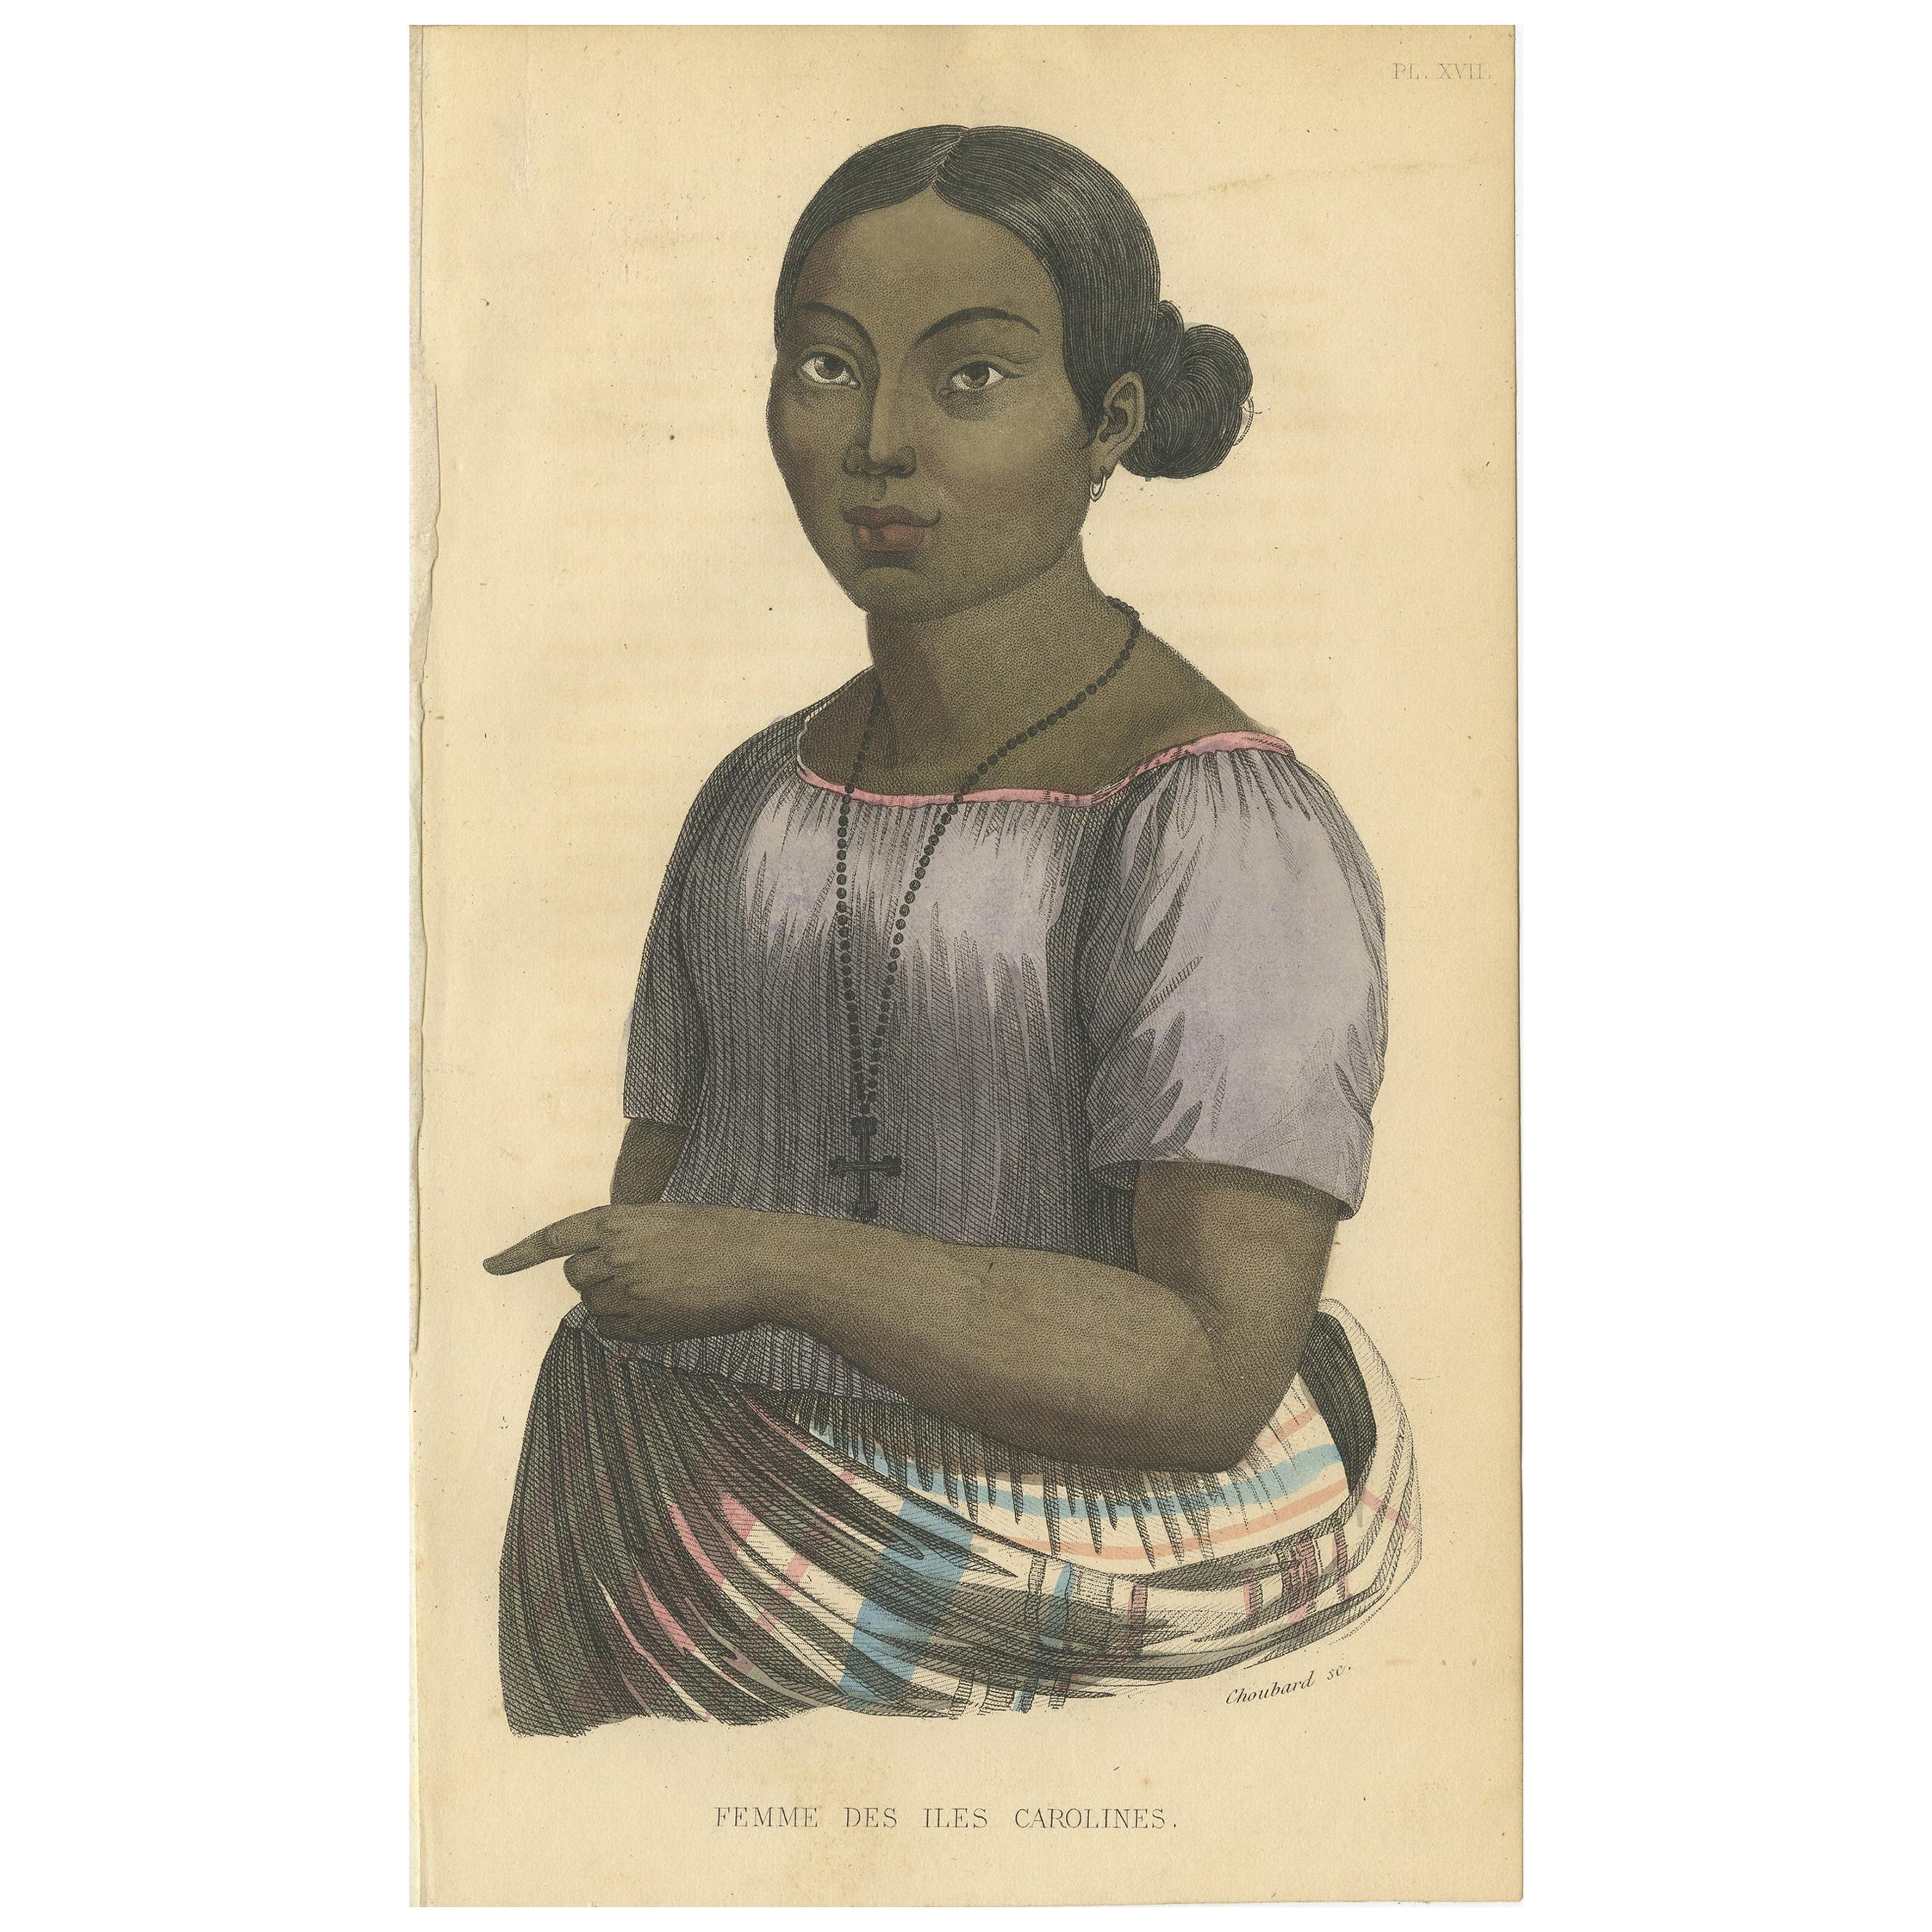 Antique Print of a Female of the Caroline Islands by Prichard, 1843